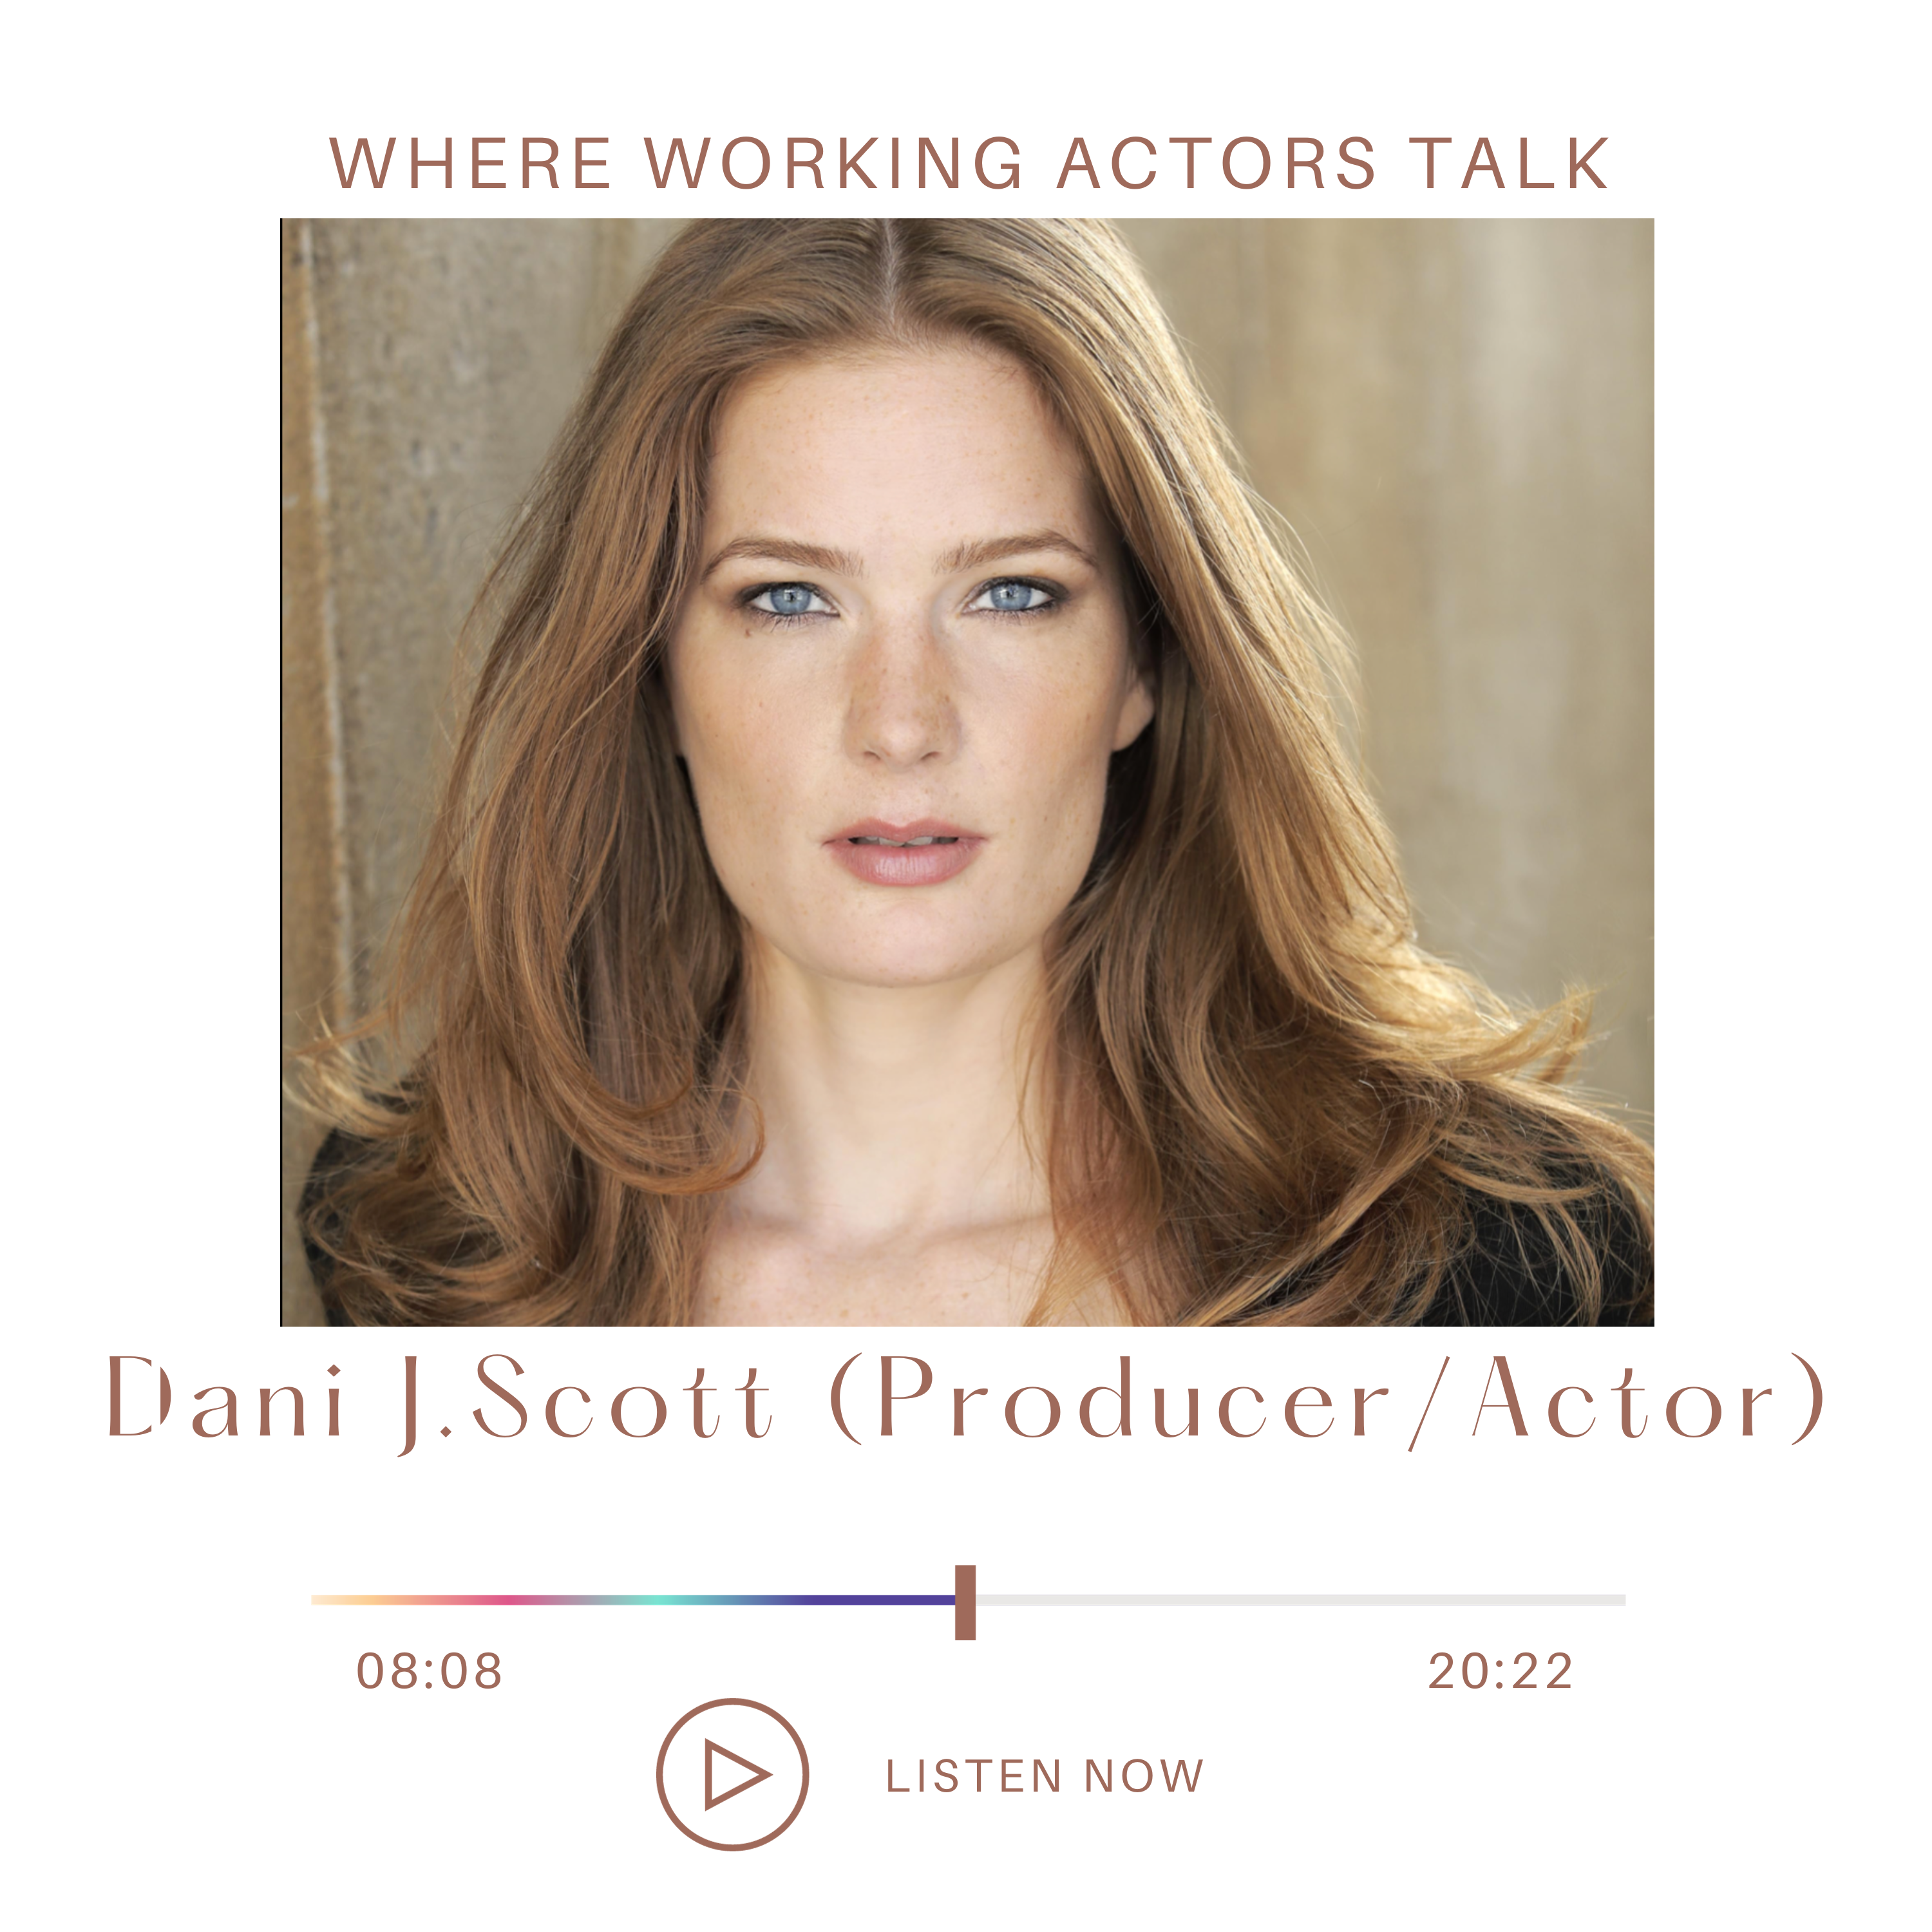 Actor and producer Dani Scott being interviewed for the acting podcast where working actors work